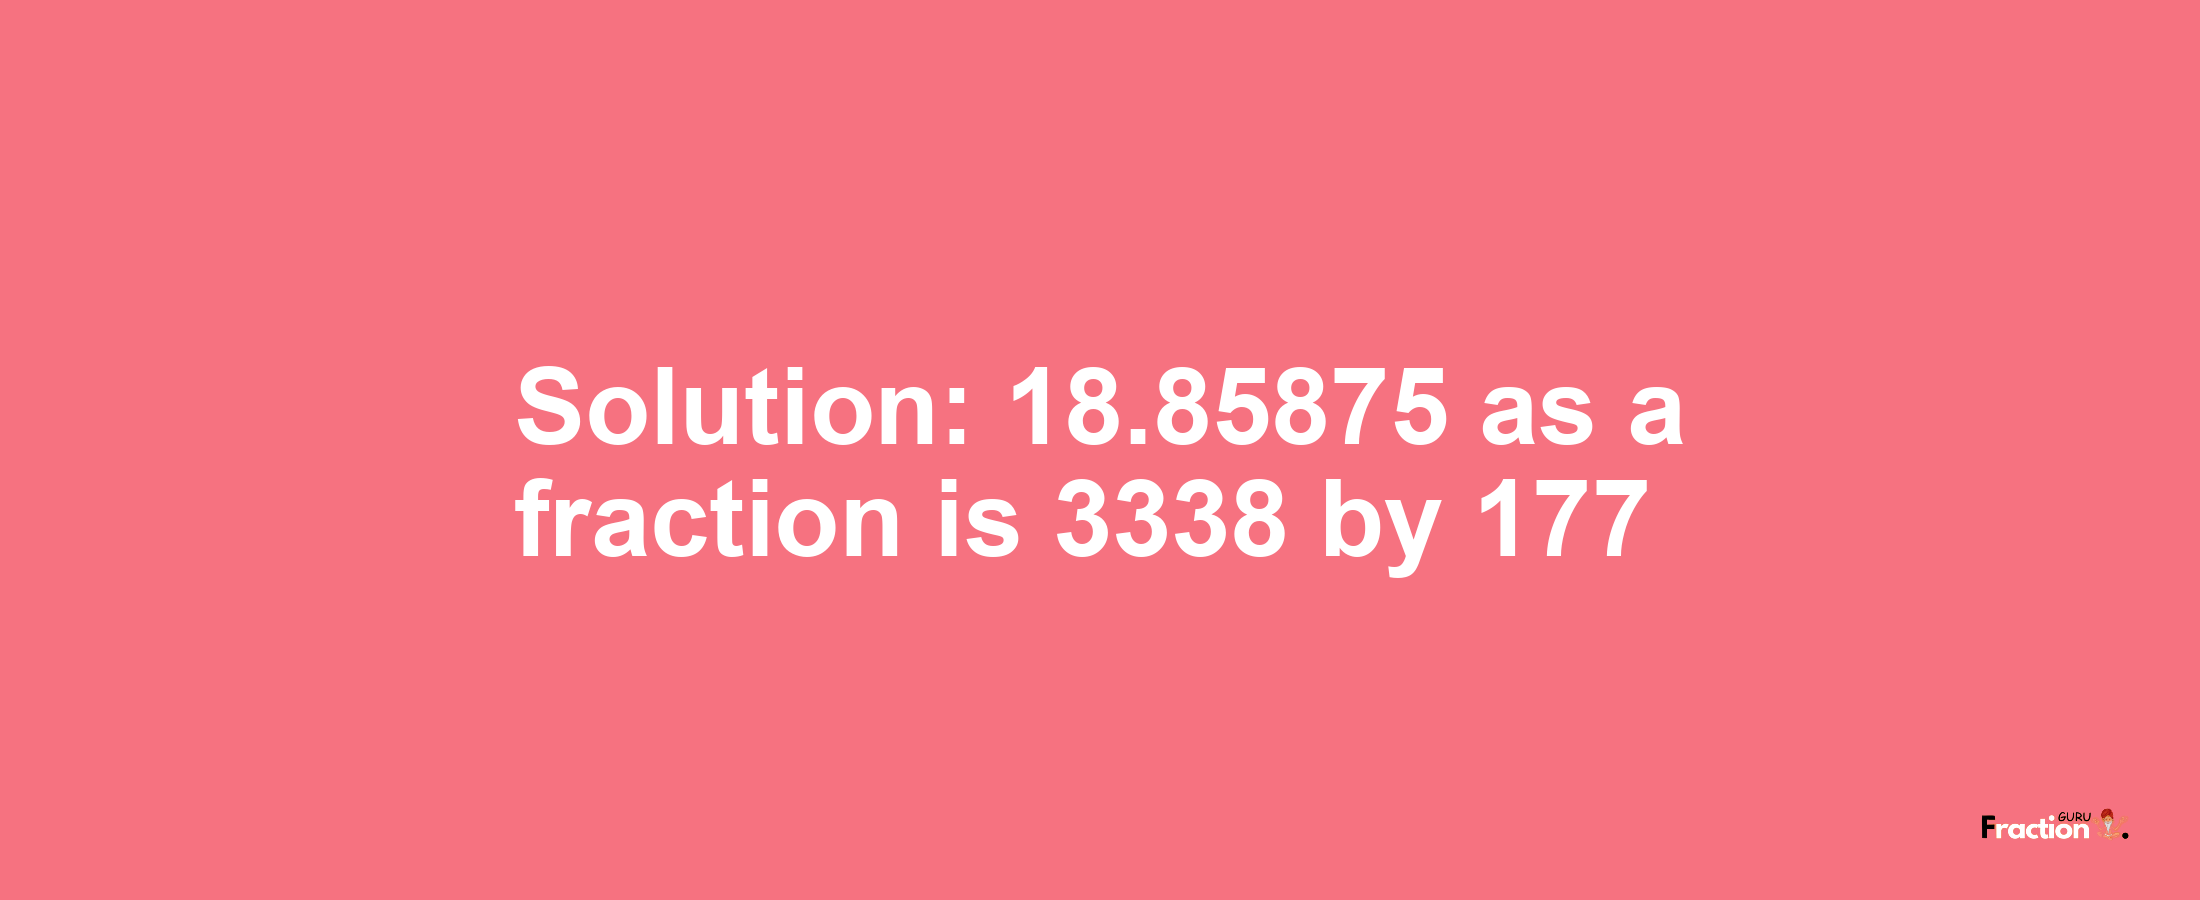 Solution:18.85875 as a fraction is 3338/177